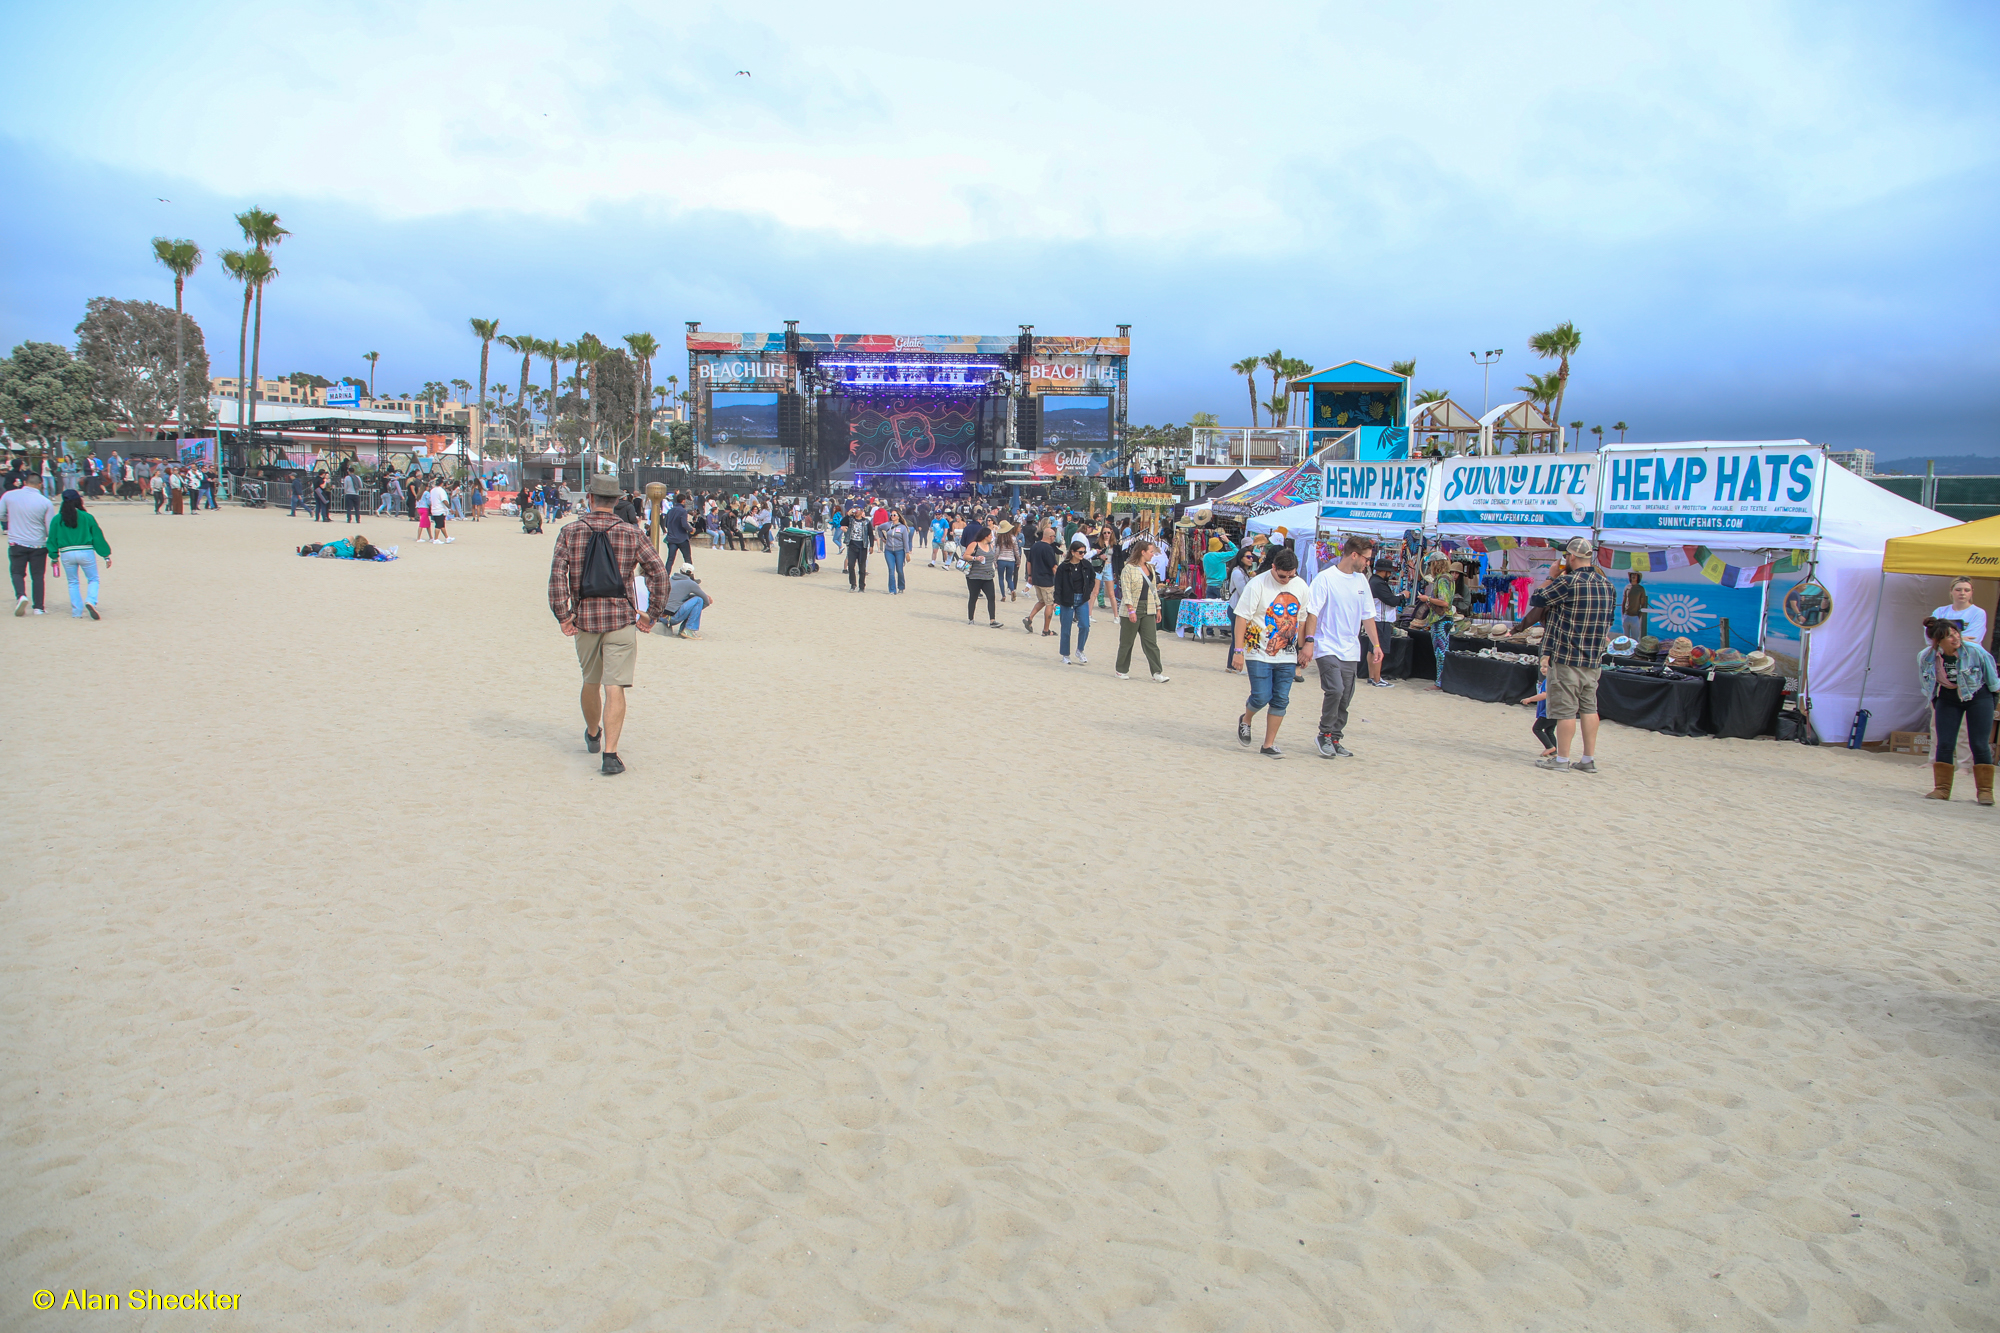 The expansive beach viewing area of the Low Tide stage, between bands on Saturday